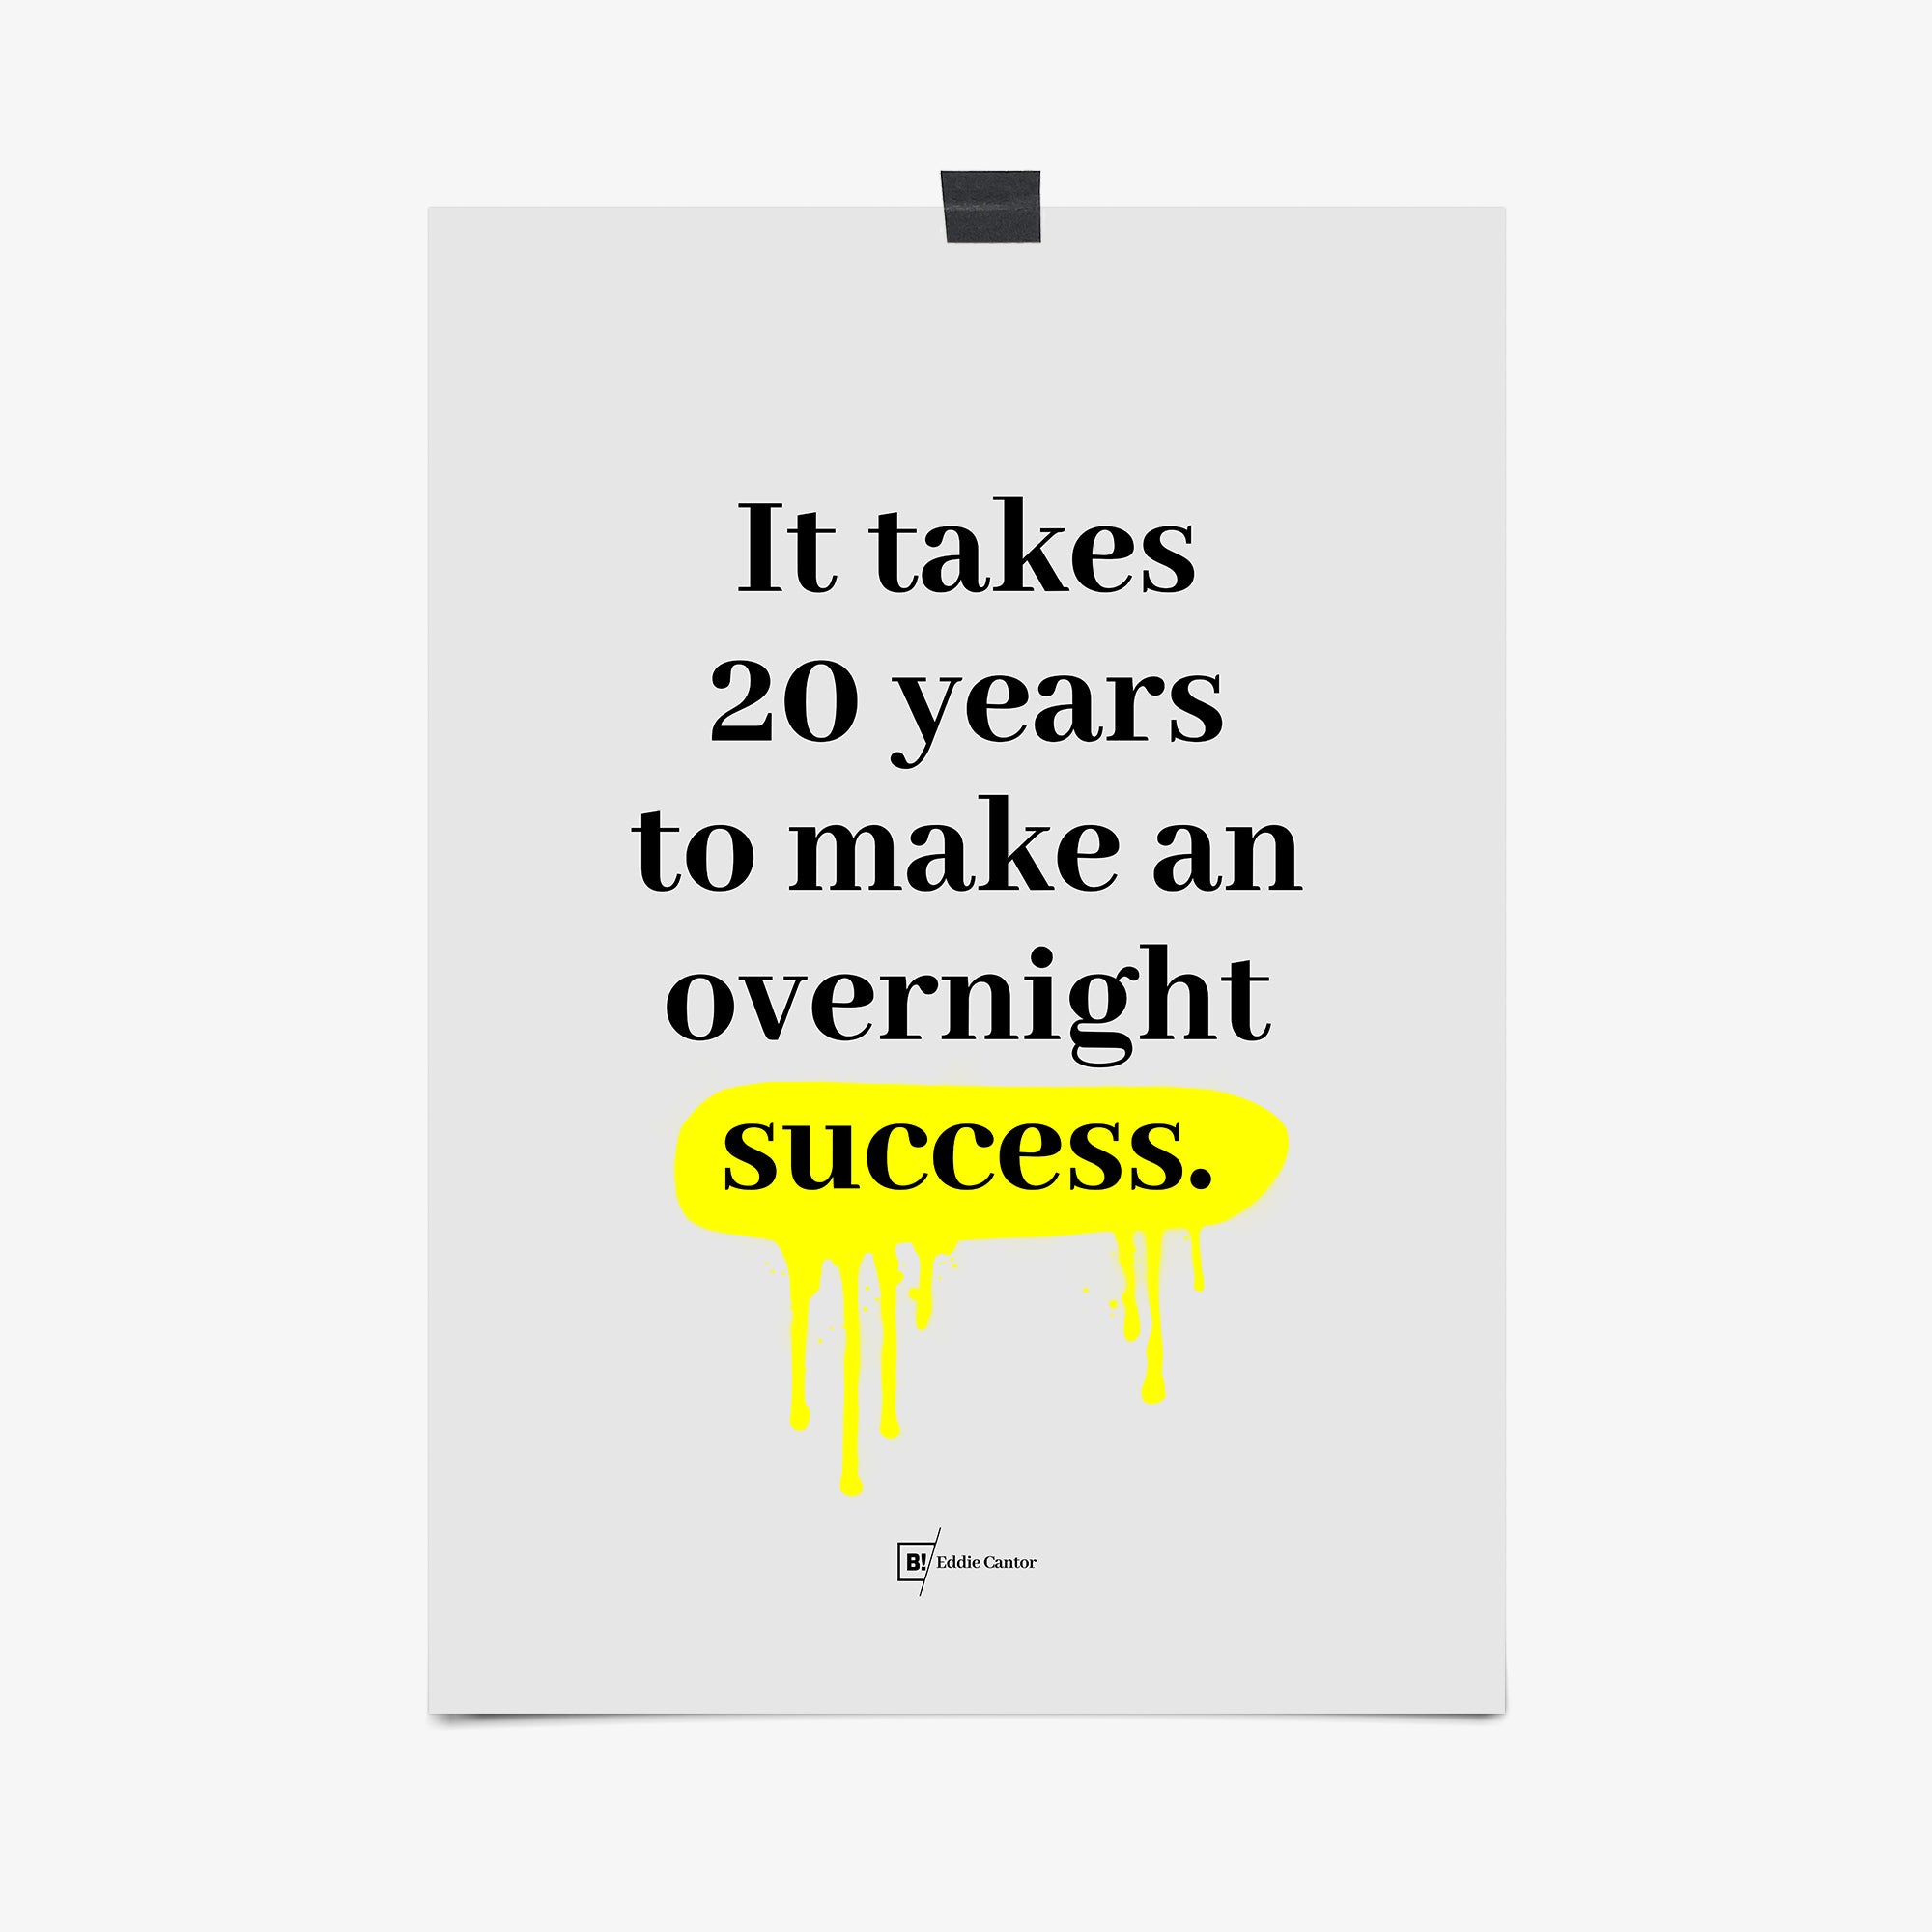 Be inspired by Eddie Cantor's famous "It takes 20 years to make an overnight success" quote art print. This artwork was printed using the giclée process on archival acid-free paper that captures its timeless beauty in every detail.